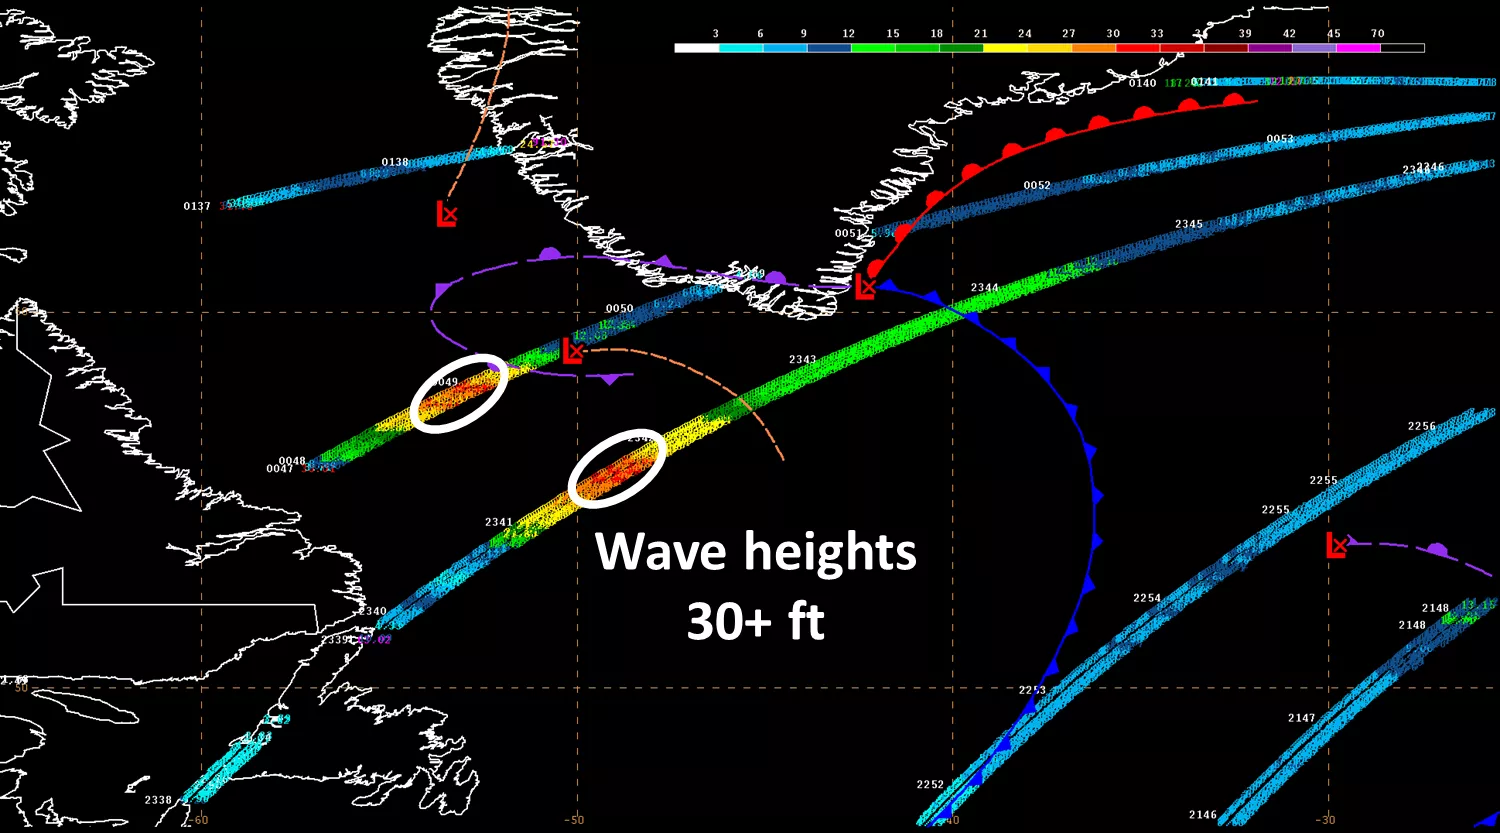 Visualization of wave height measurements, measured at 30+ feet high, from Jason satellites 